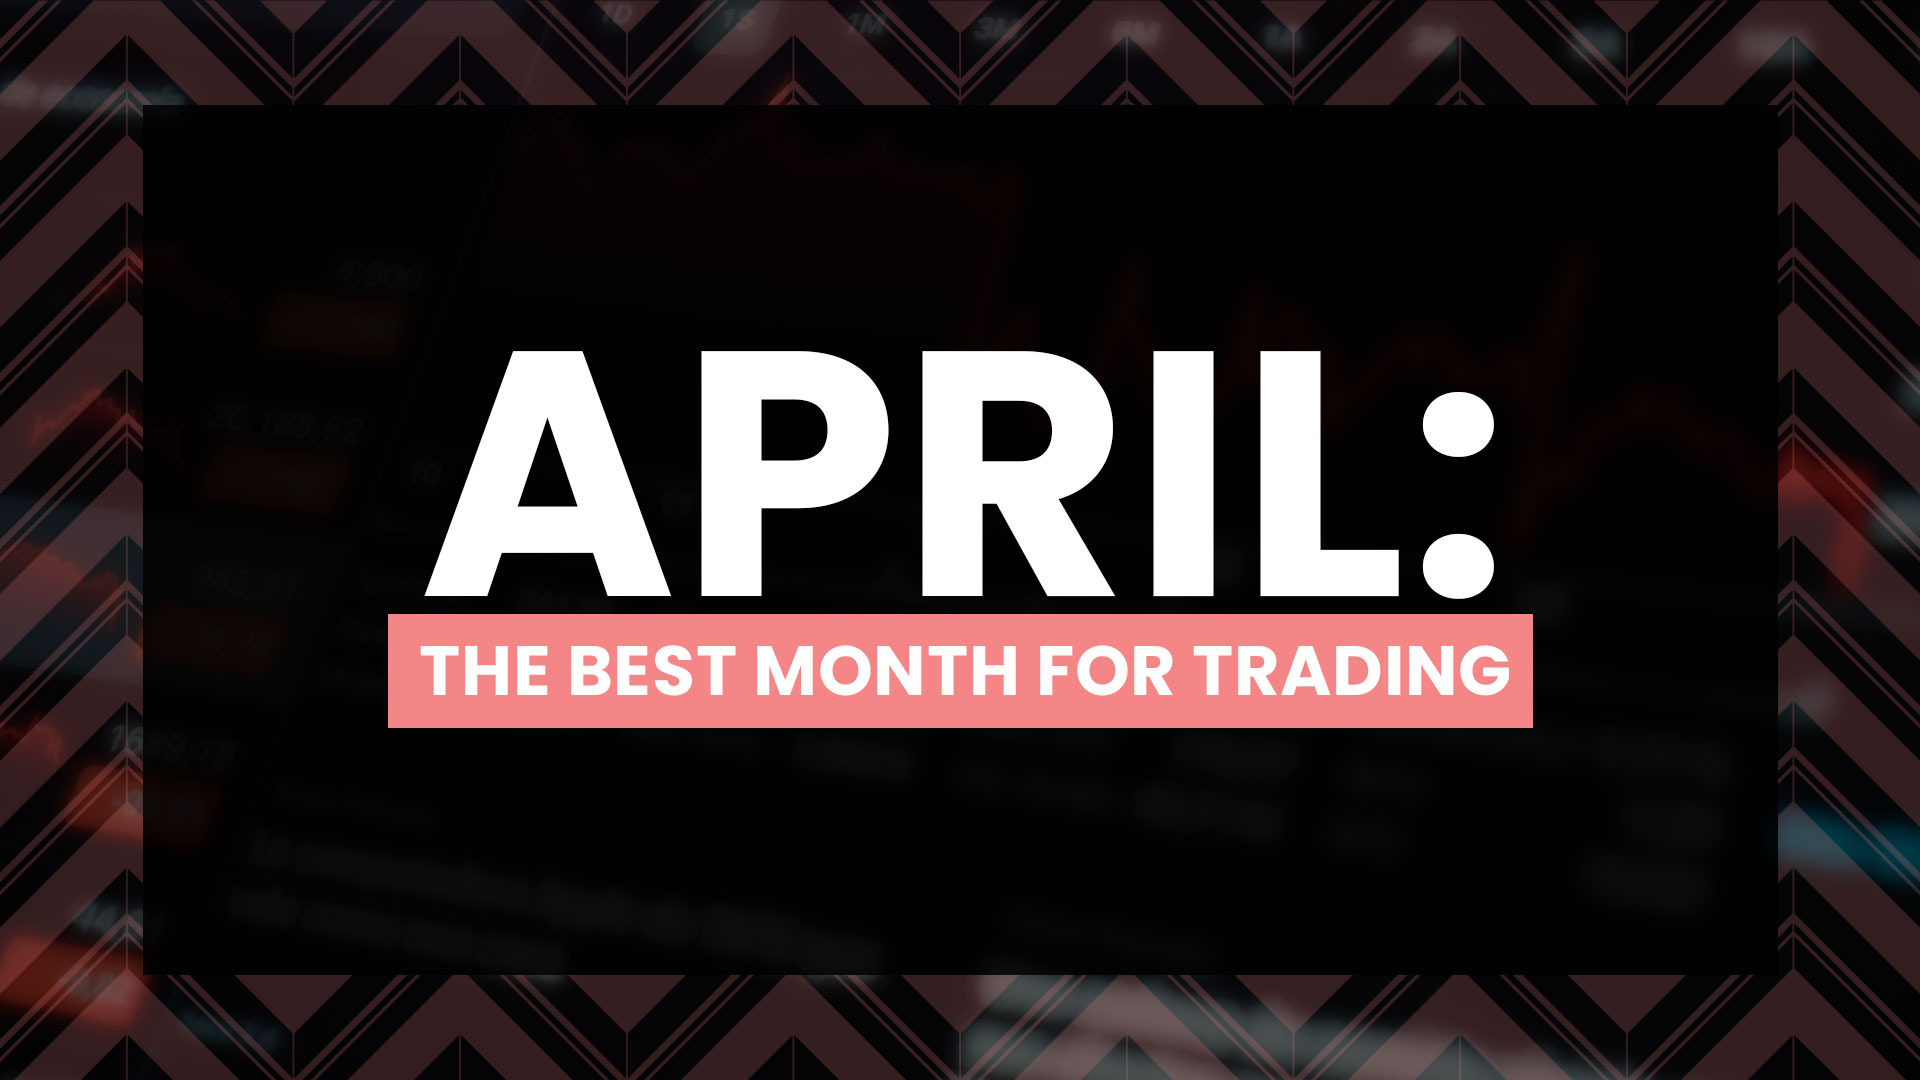 April: The Best Month for Trading